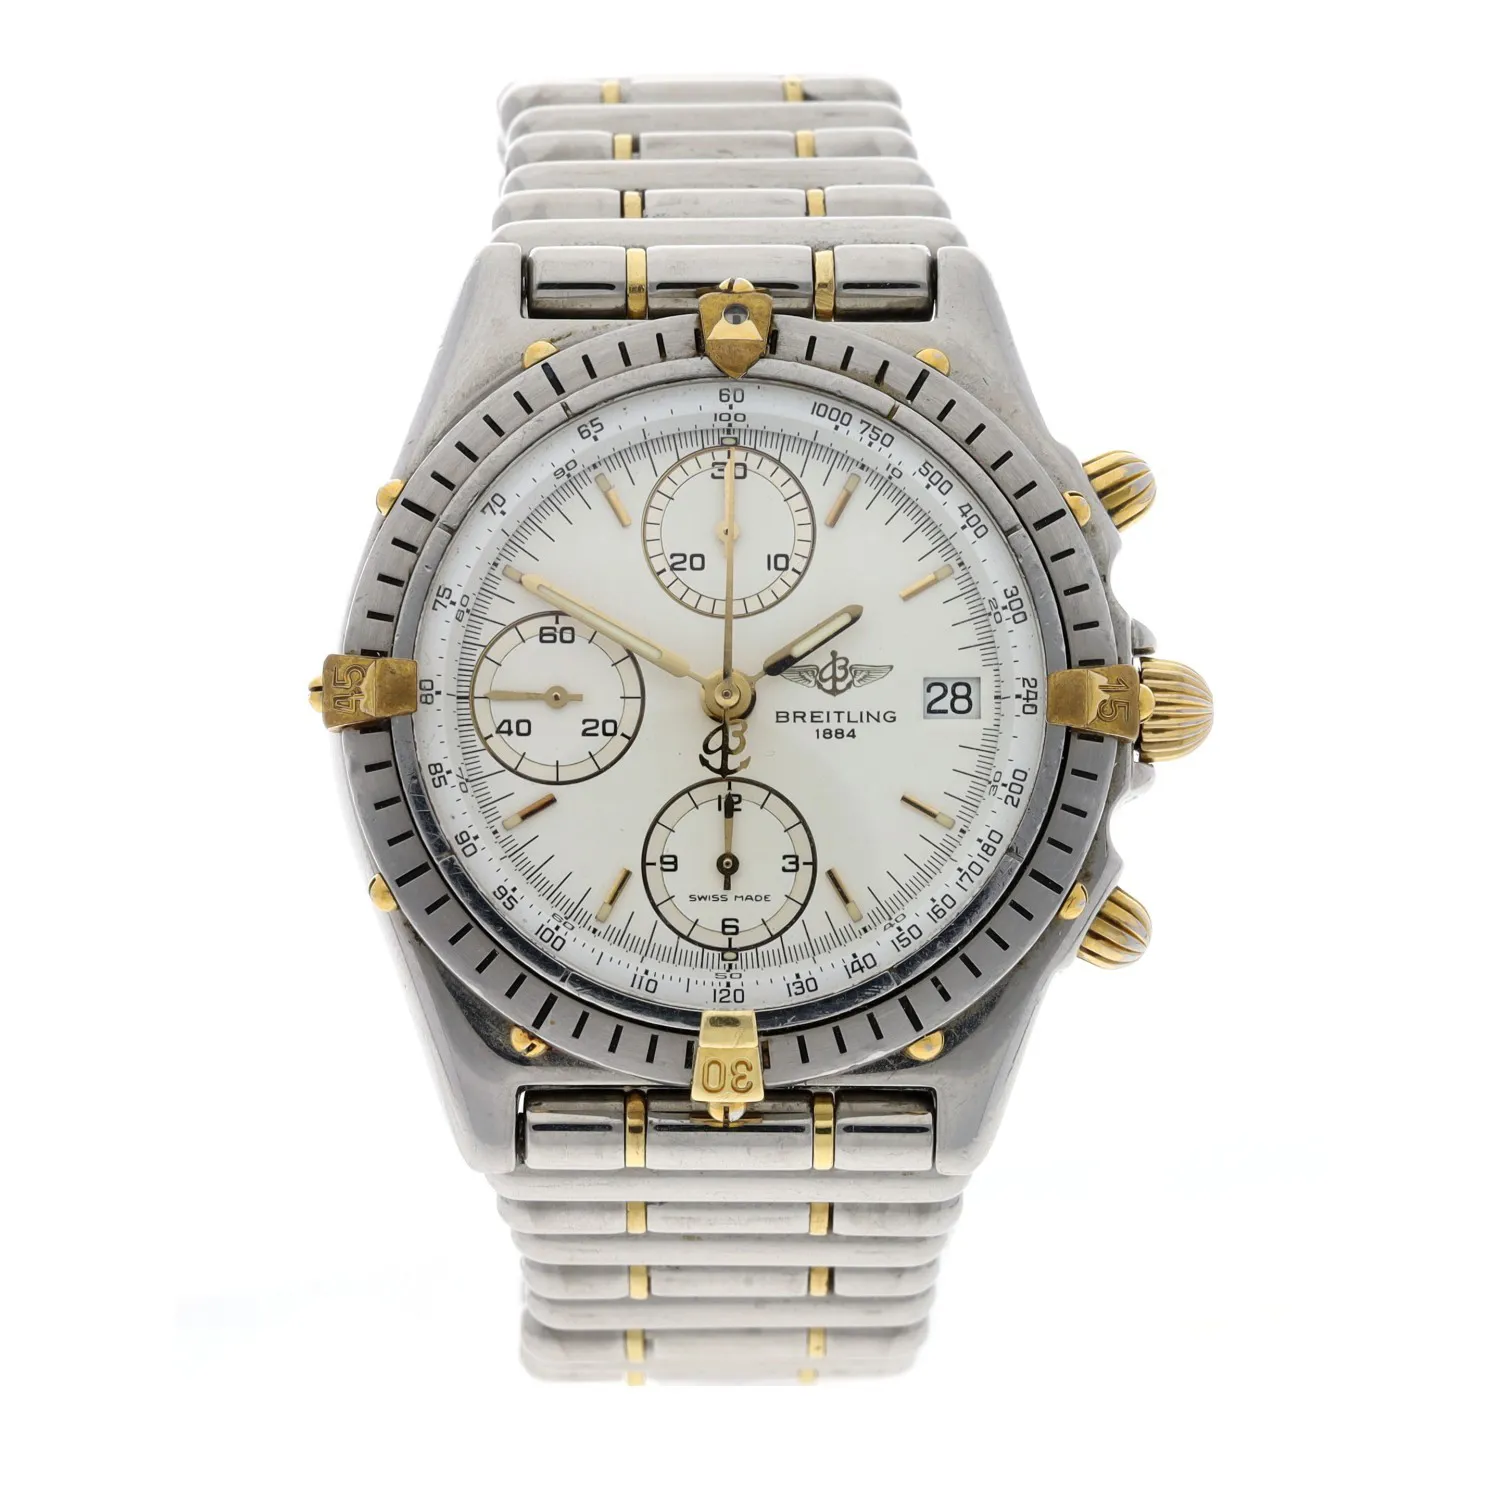 Breitling Chronomat 81.950 B13047 41mm Stainless steel and yellow gold Silver